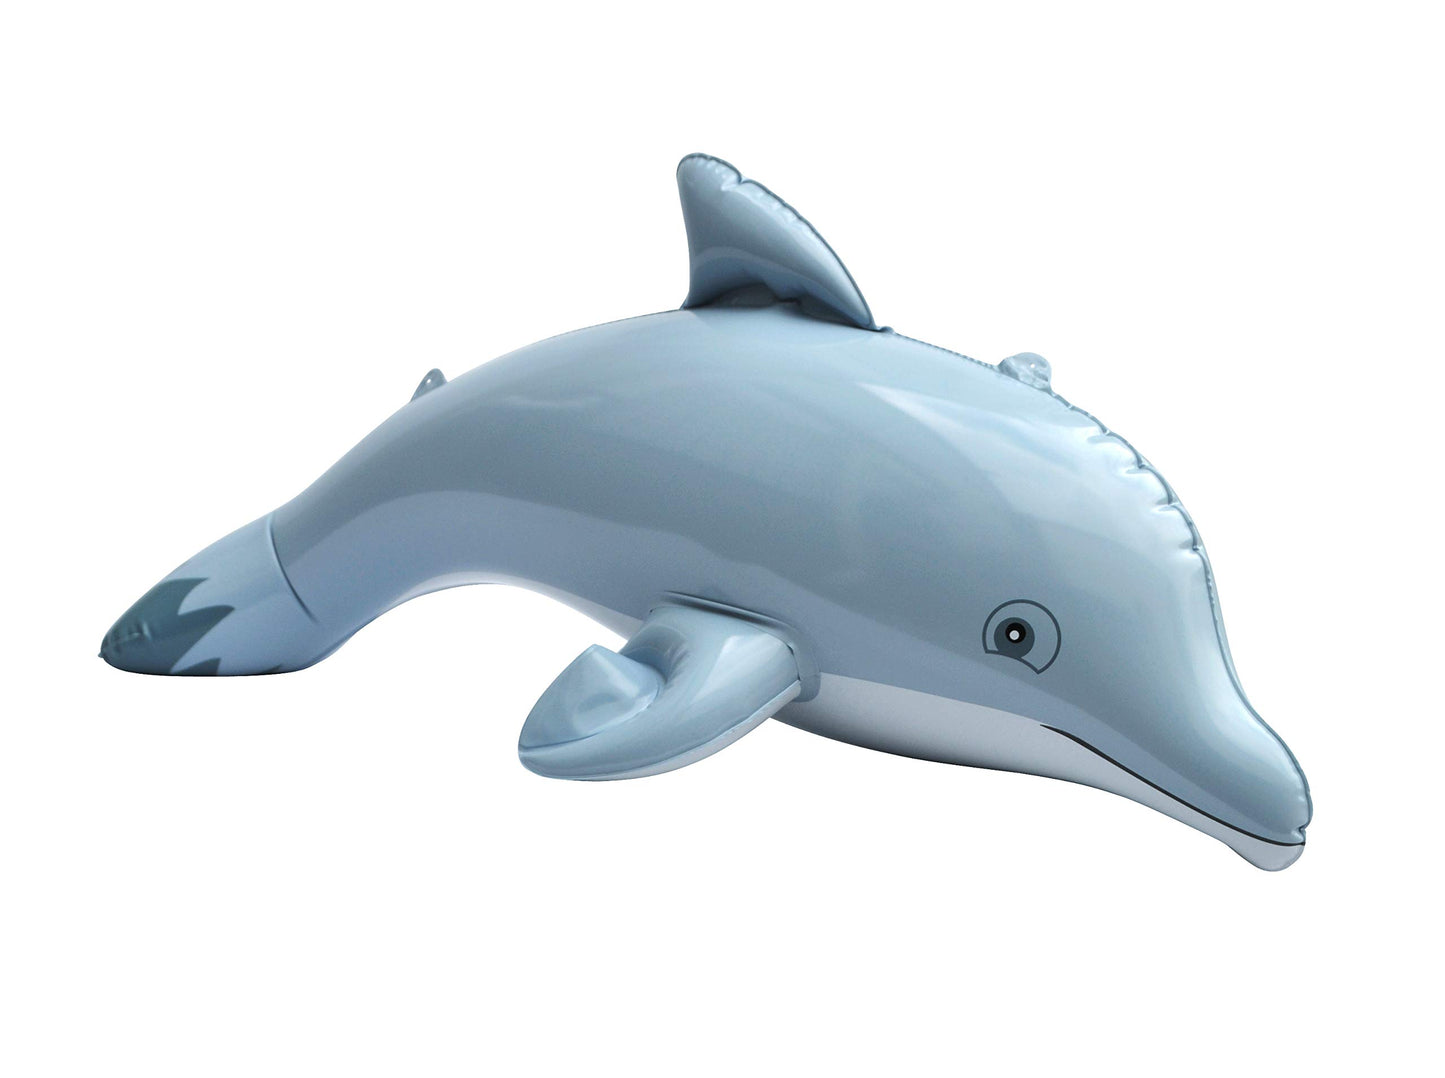 Jet Creations Inflatable Animals Dolphin 20" Long Best for Party Pool Supplies Favors Gifts for Kids & Adults an-DOL4, Multi